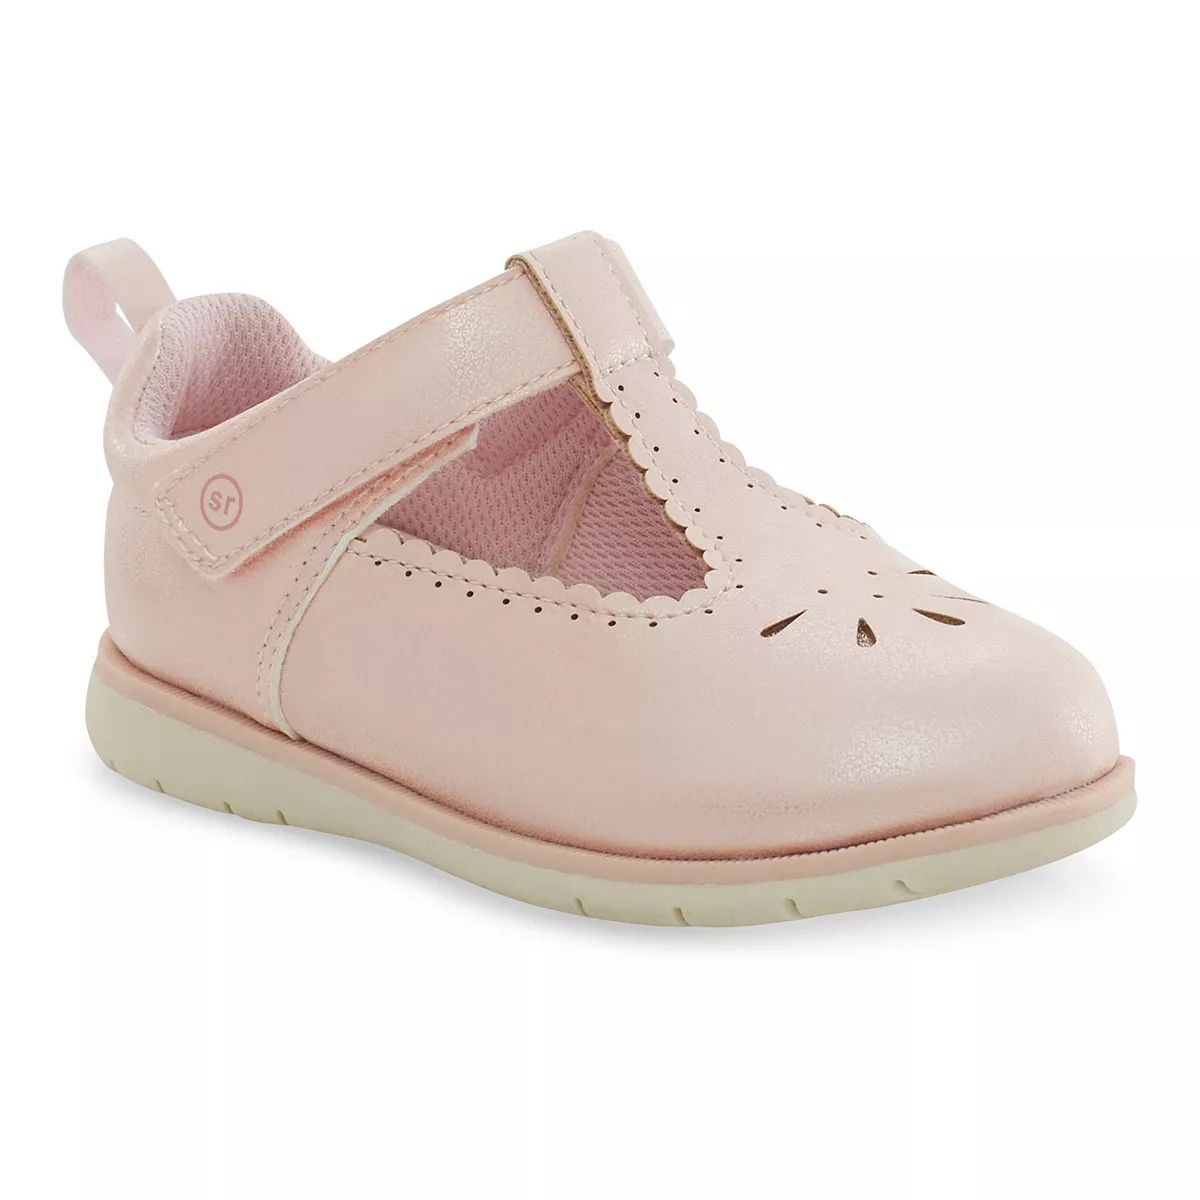 Stride Rite 360 Lacey Toddler Girls' Mary Jane Shoes | Kohl's